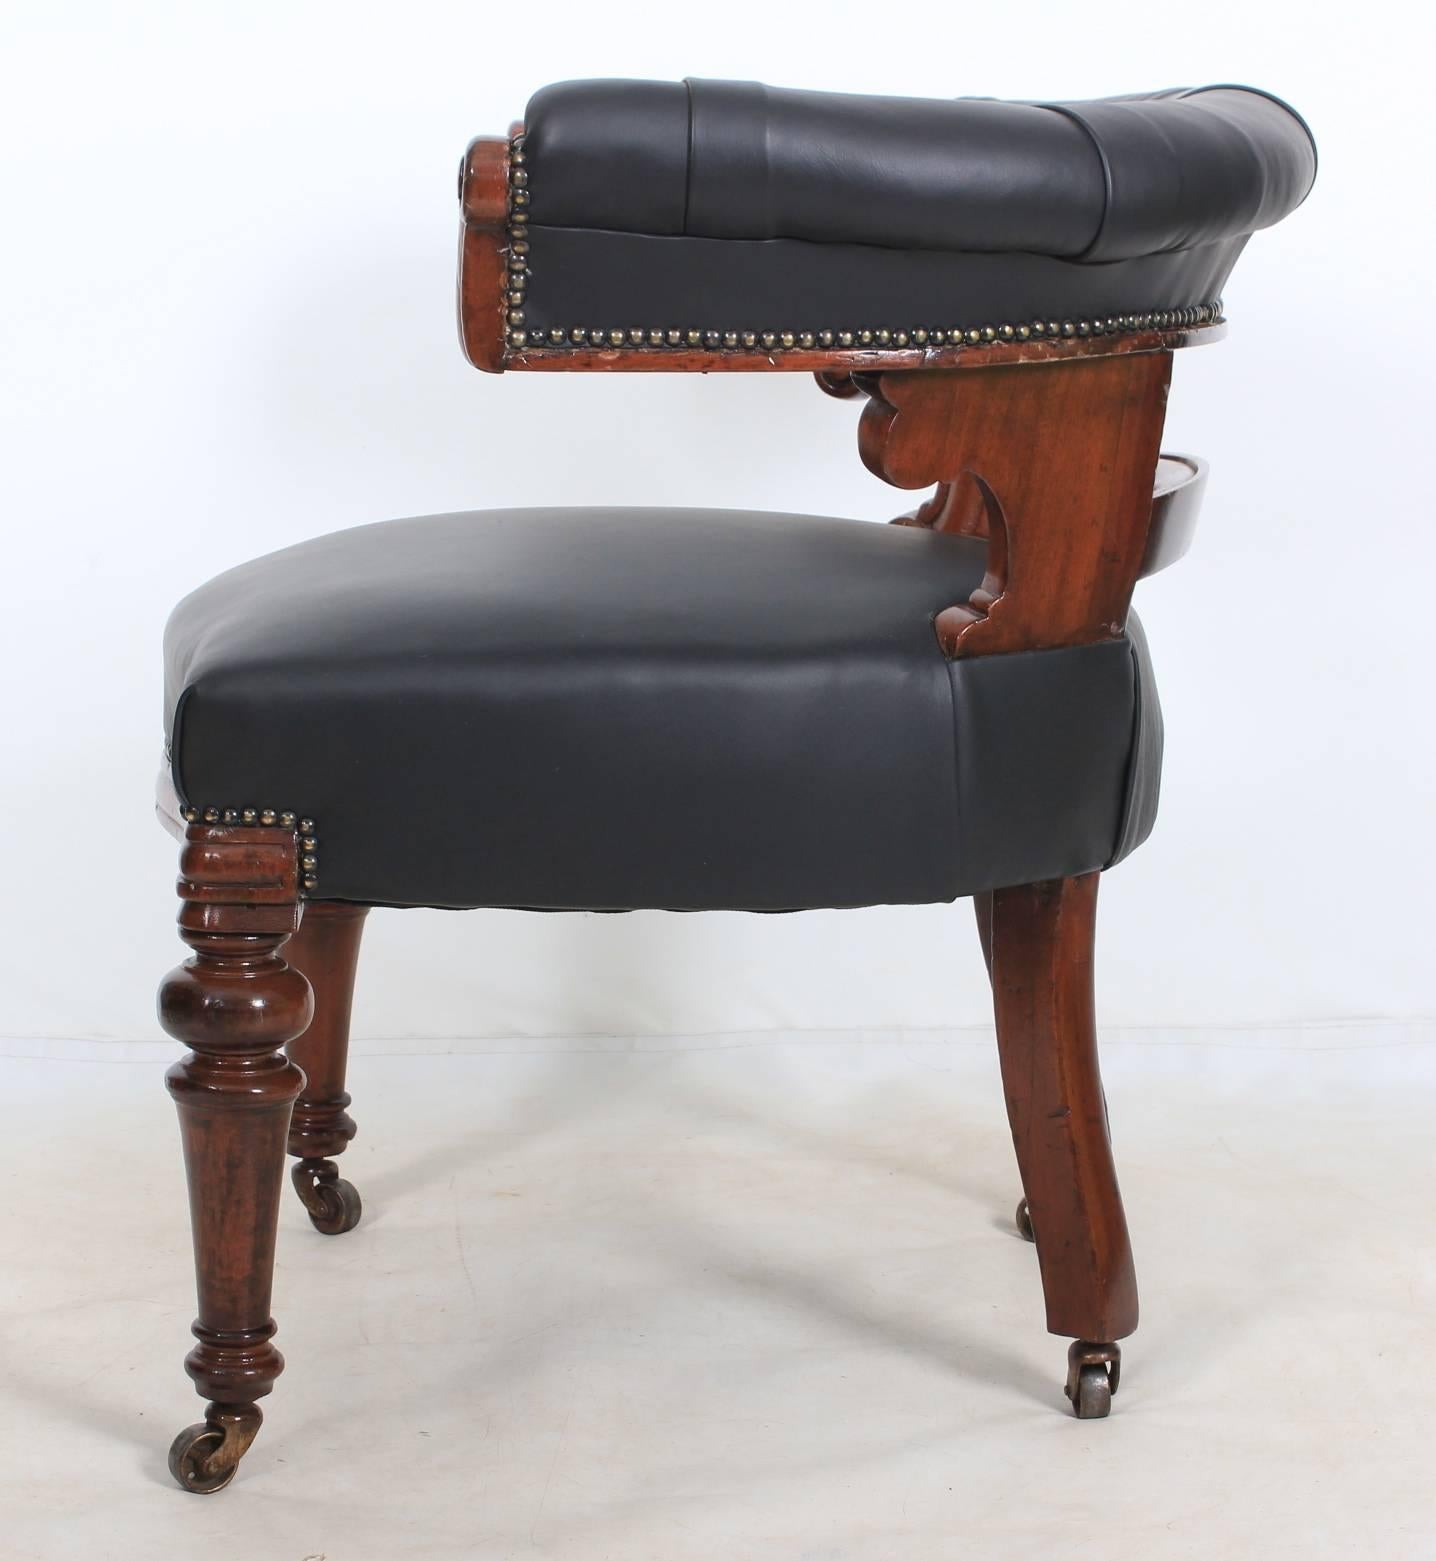 English, circa 1840.
A heavy mahogany and leather desk chair in showroom condition.
Lovely horse shoe back upholstered in a black leather with carved scroll arms and carved back support.
Comfortable black leather seat.
On turned legs with brass